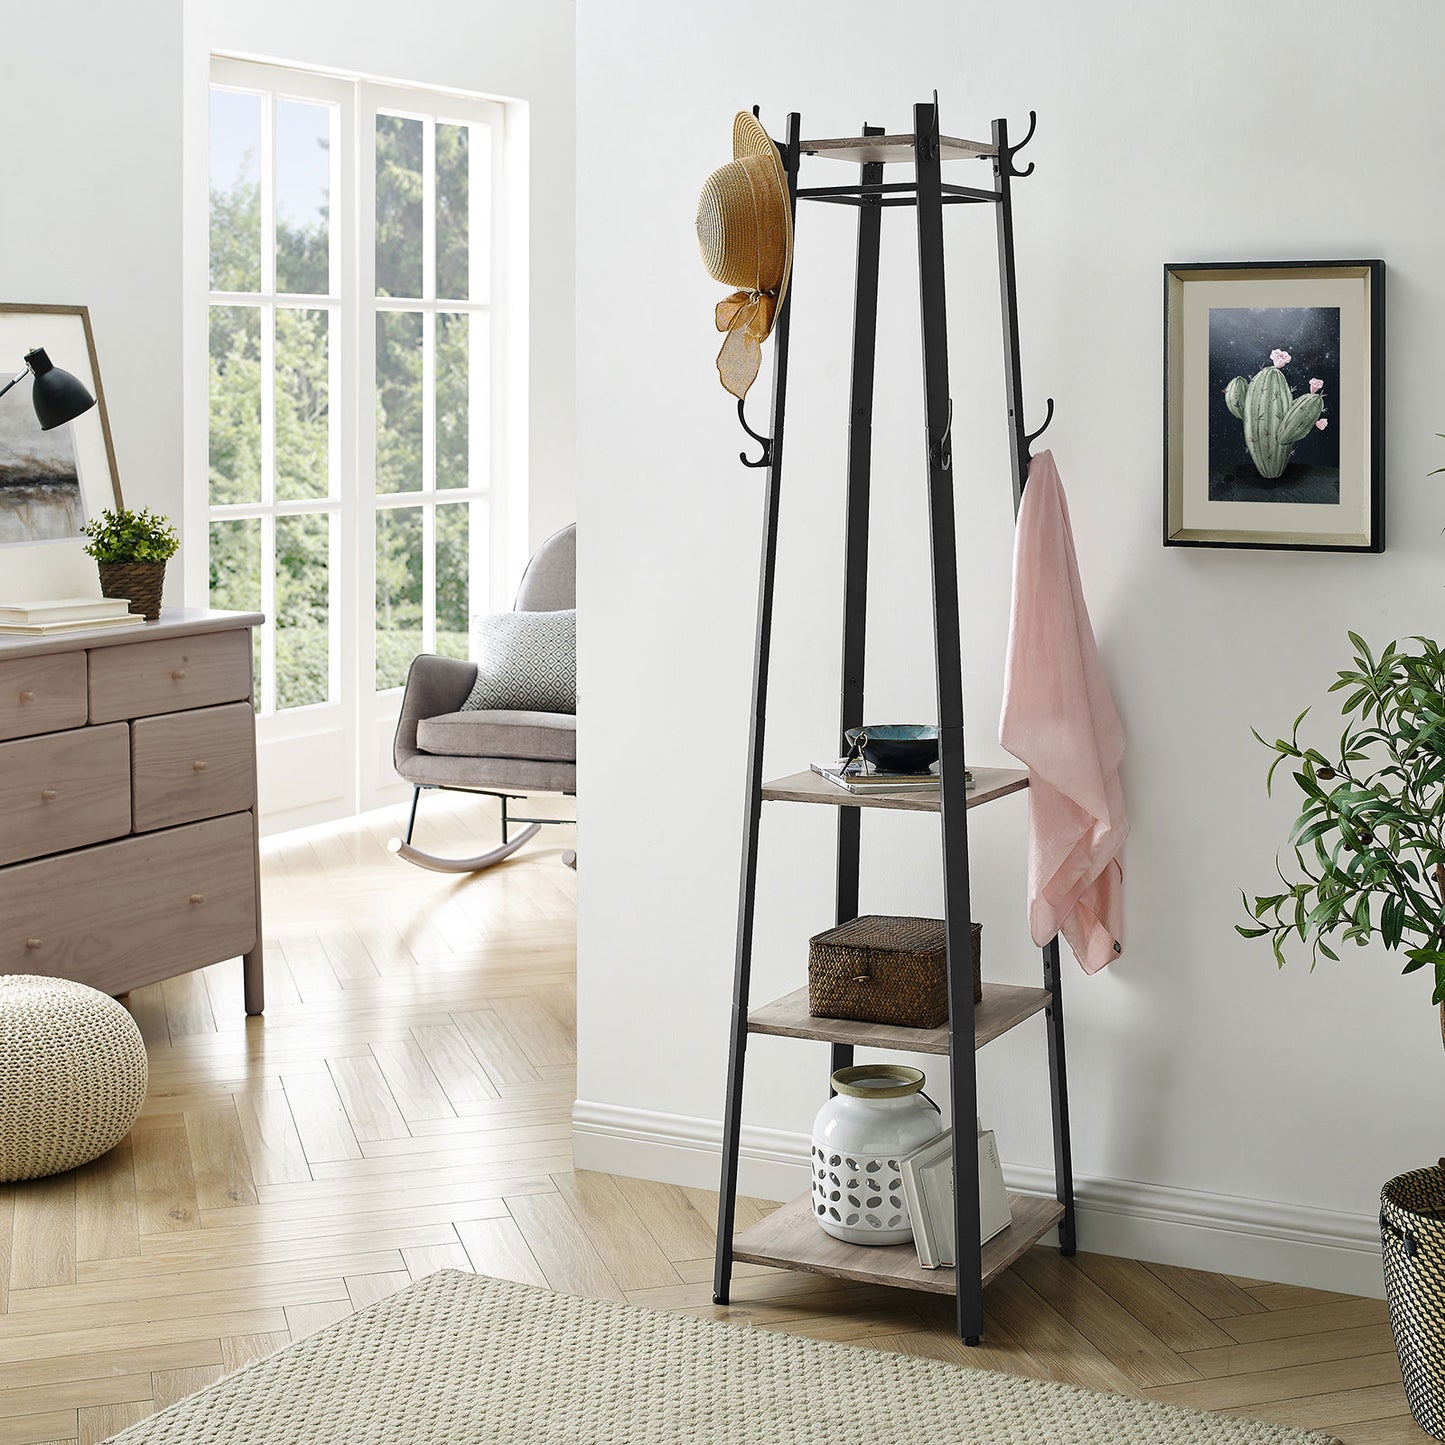 VASAGLE - Coat Rack, Coat Stand with 3 Shelves, Ladder Shelf with Hooks for Scarves, Bags and Umbrellas, Steel Frame, Industrial Style